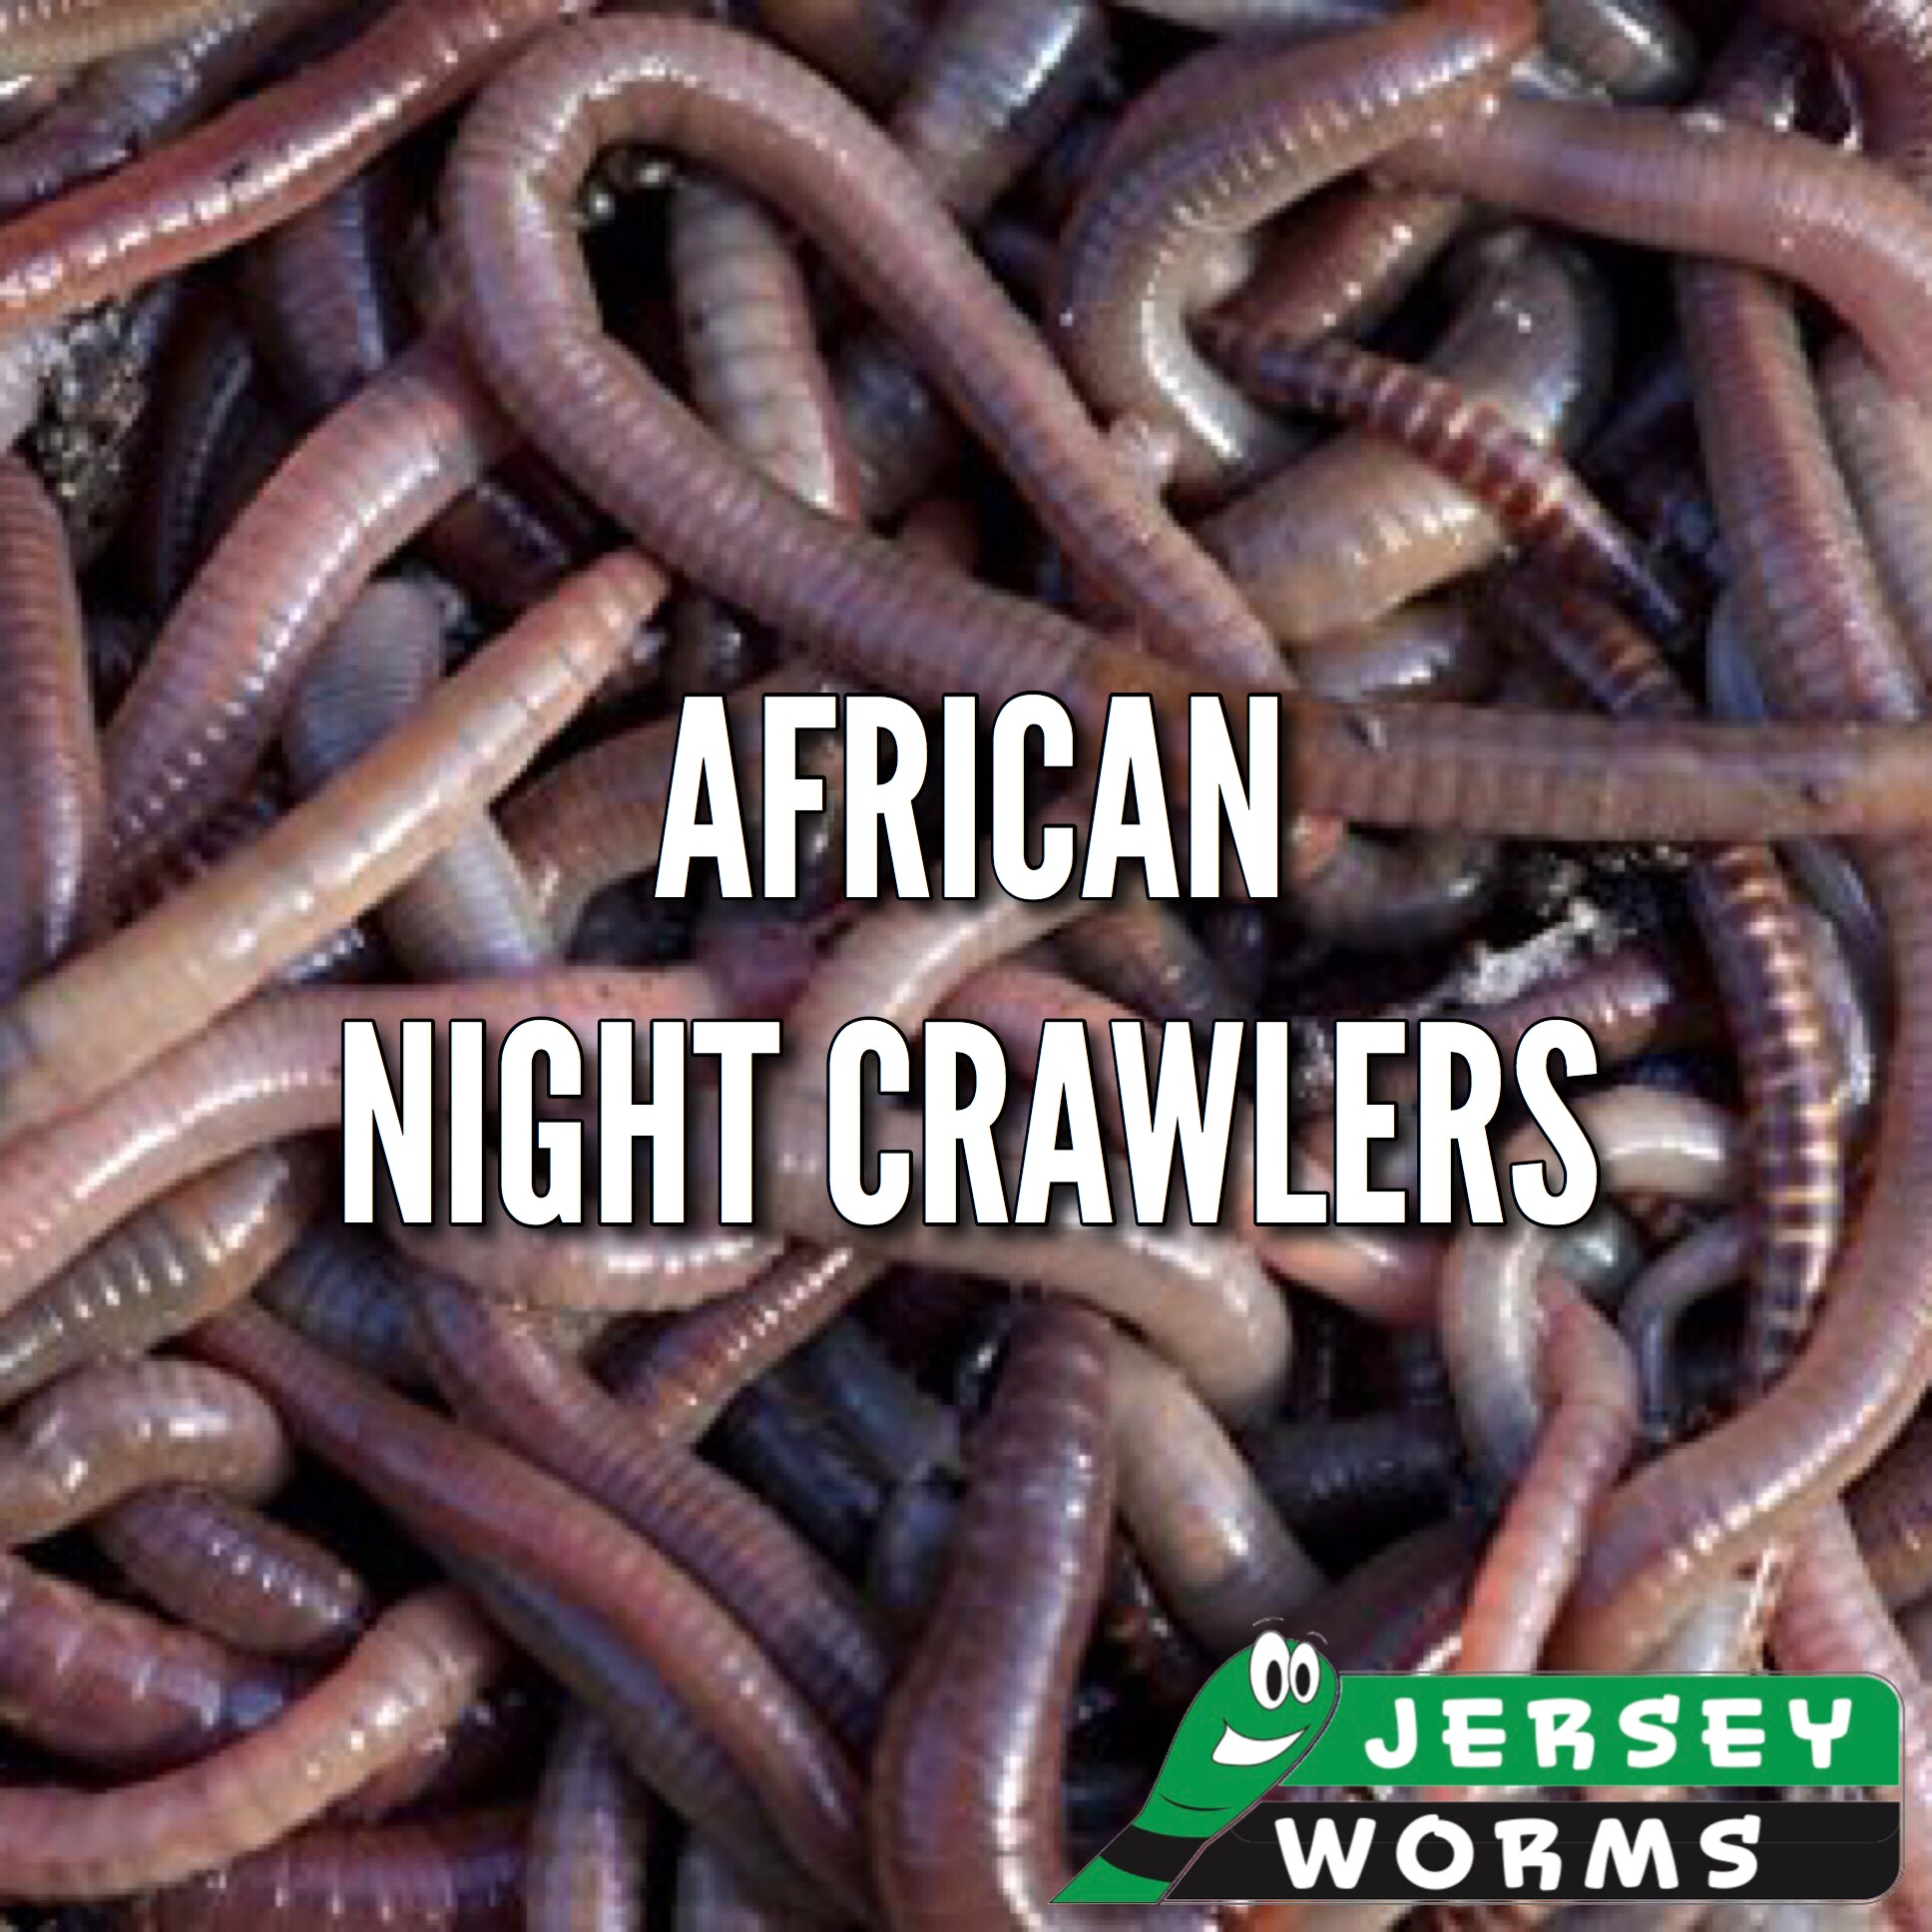 Facts About Nightcrawlers